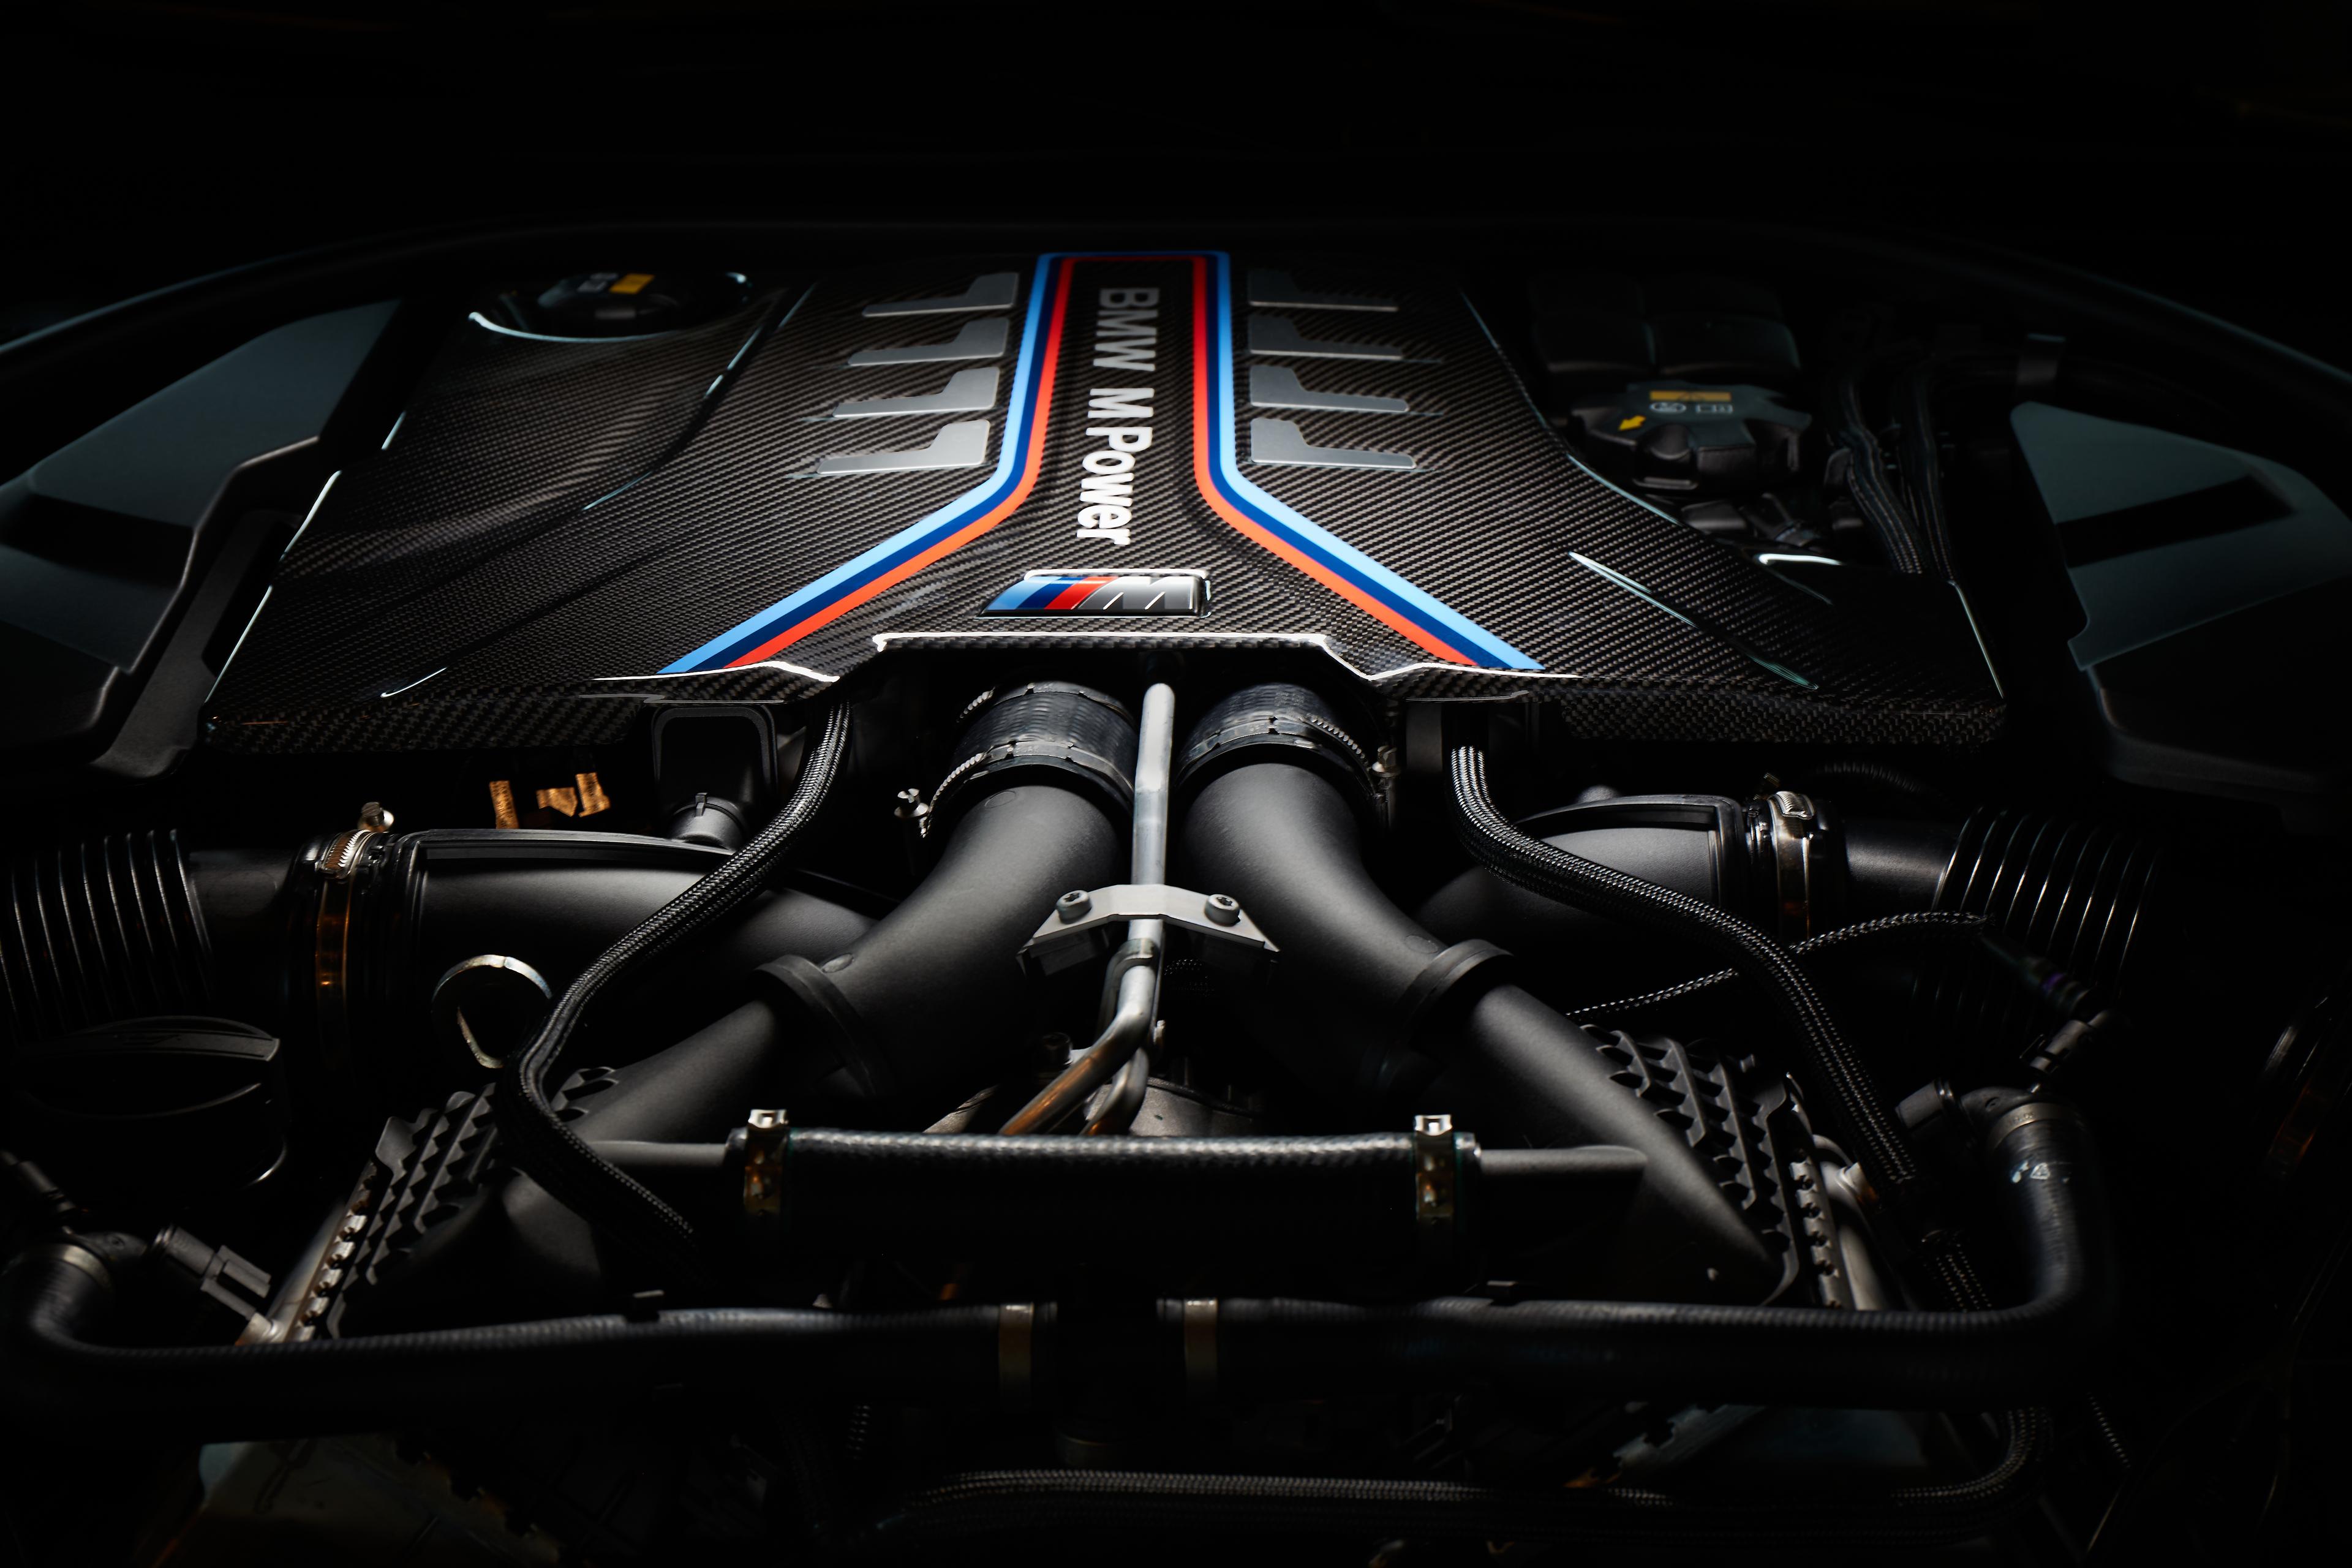 A close up of the BMW M Power engine 